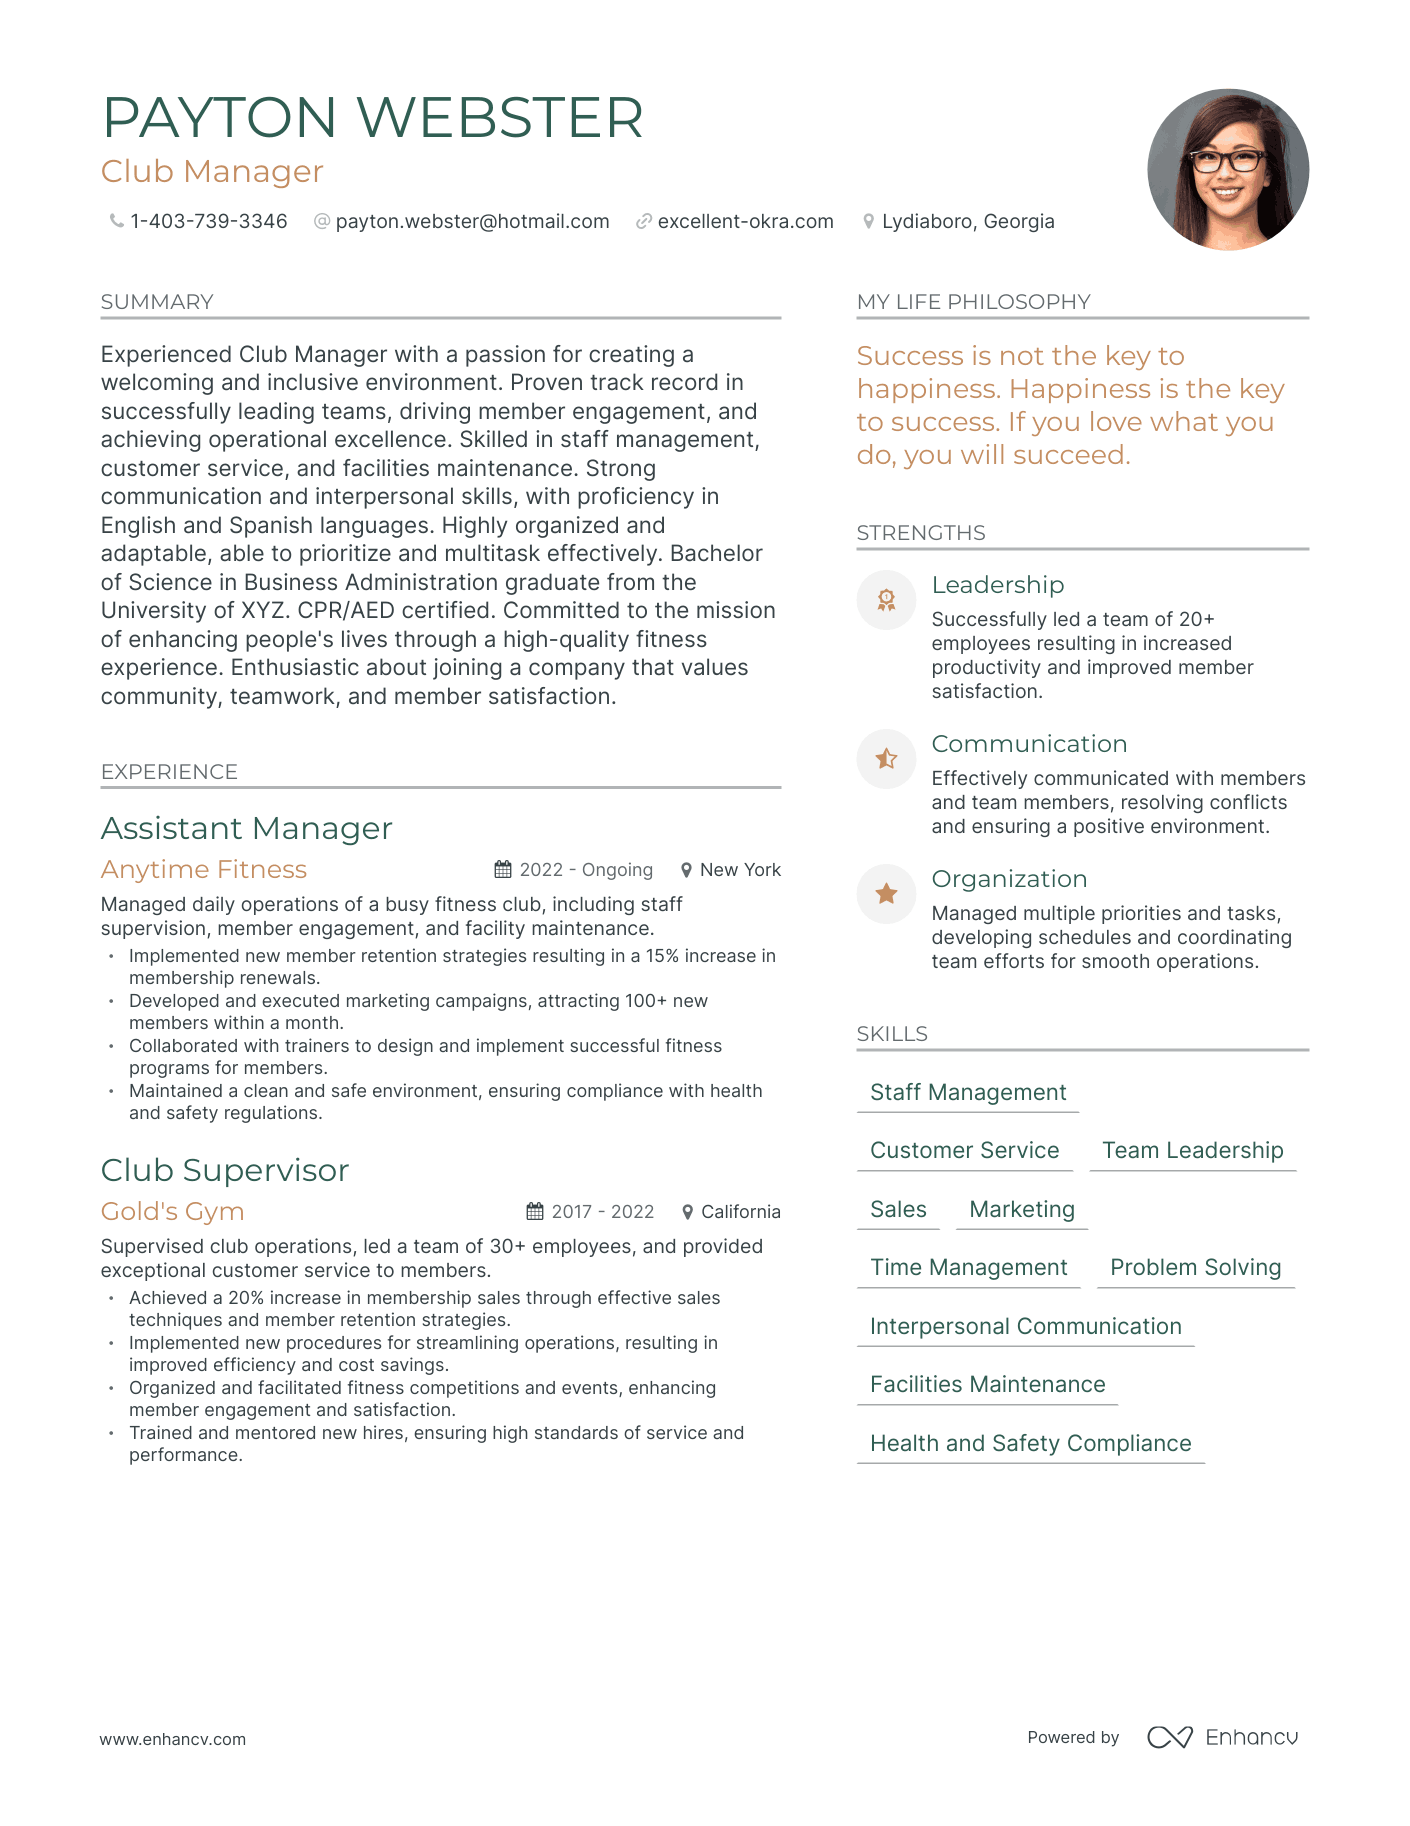 Club Manager resume example